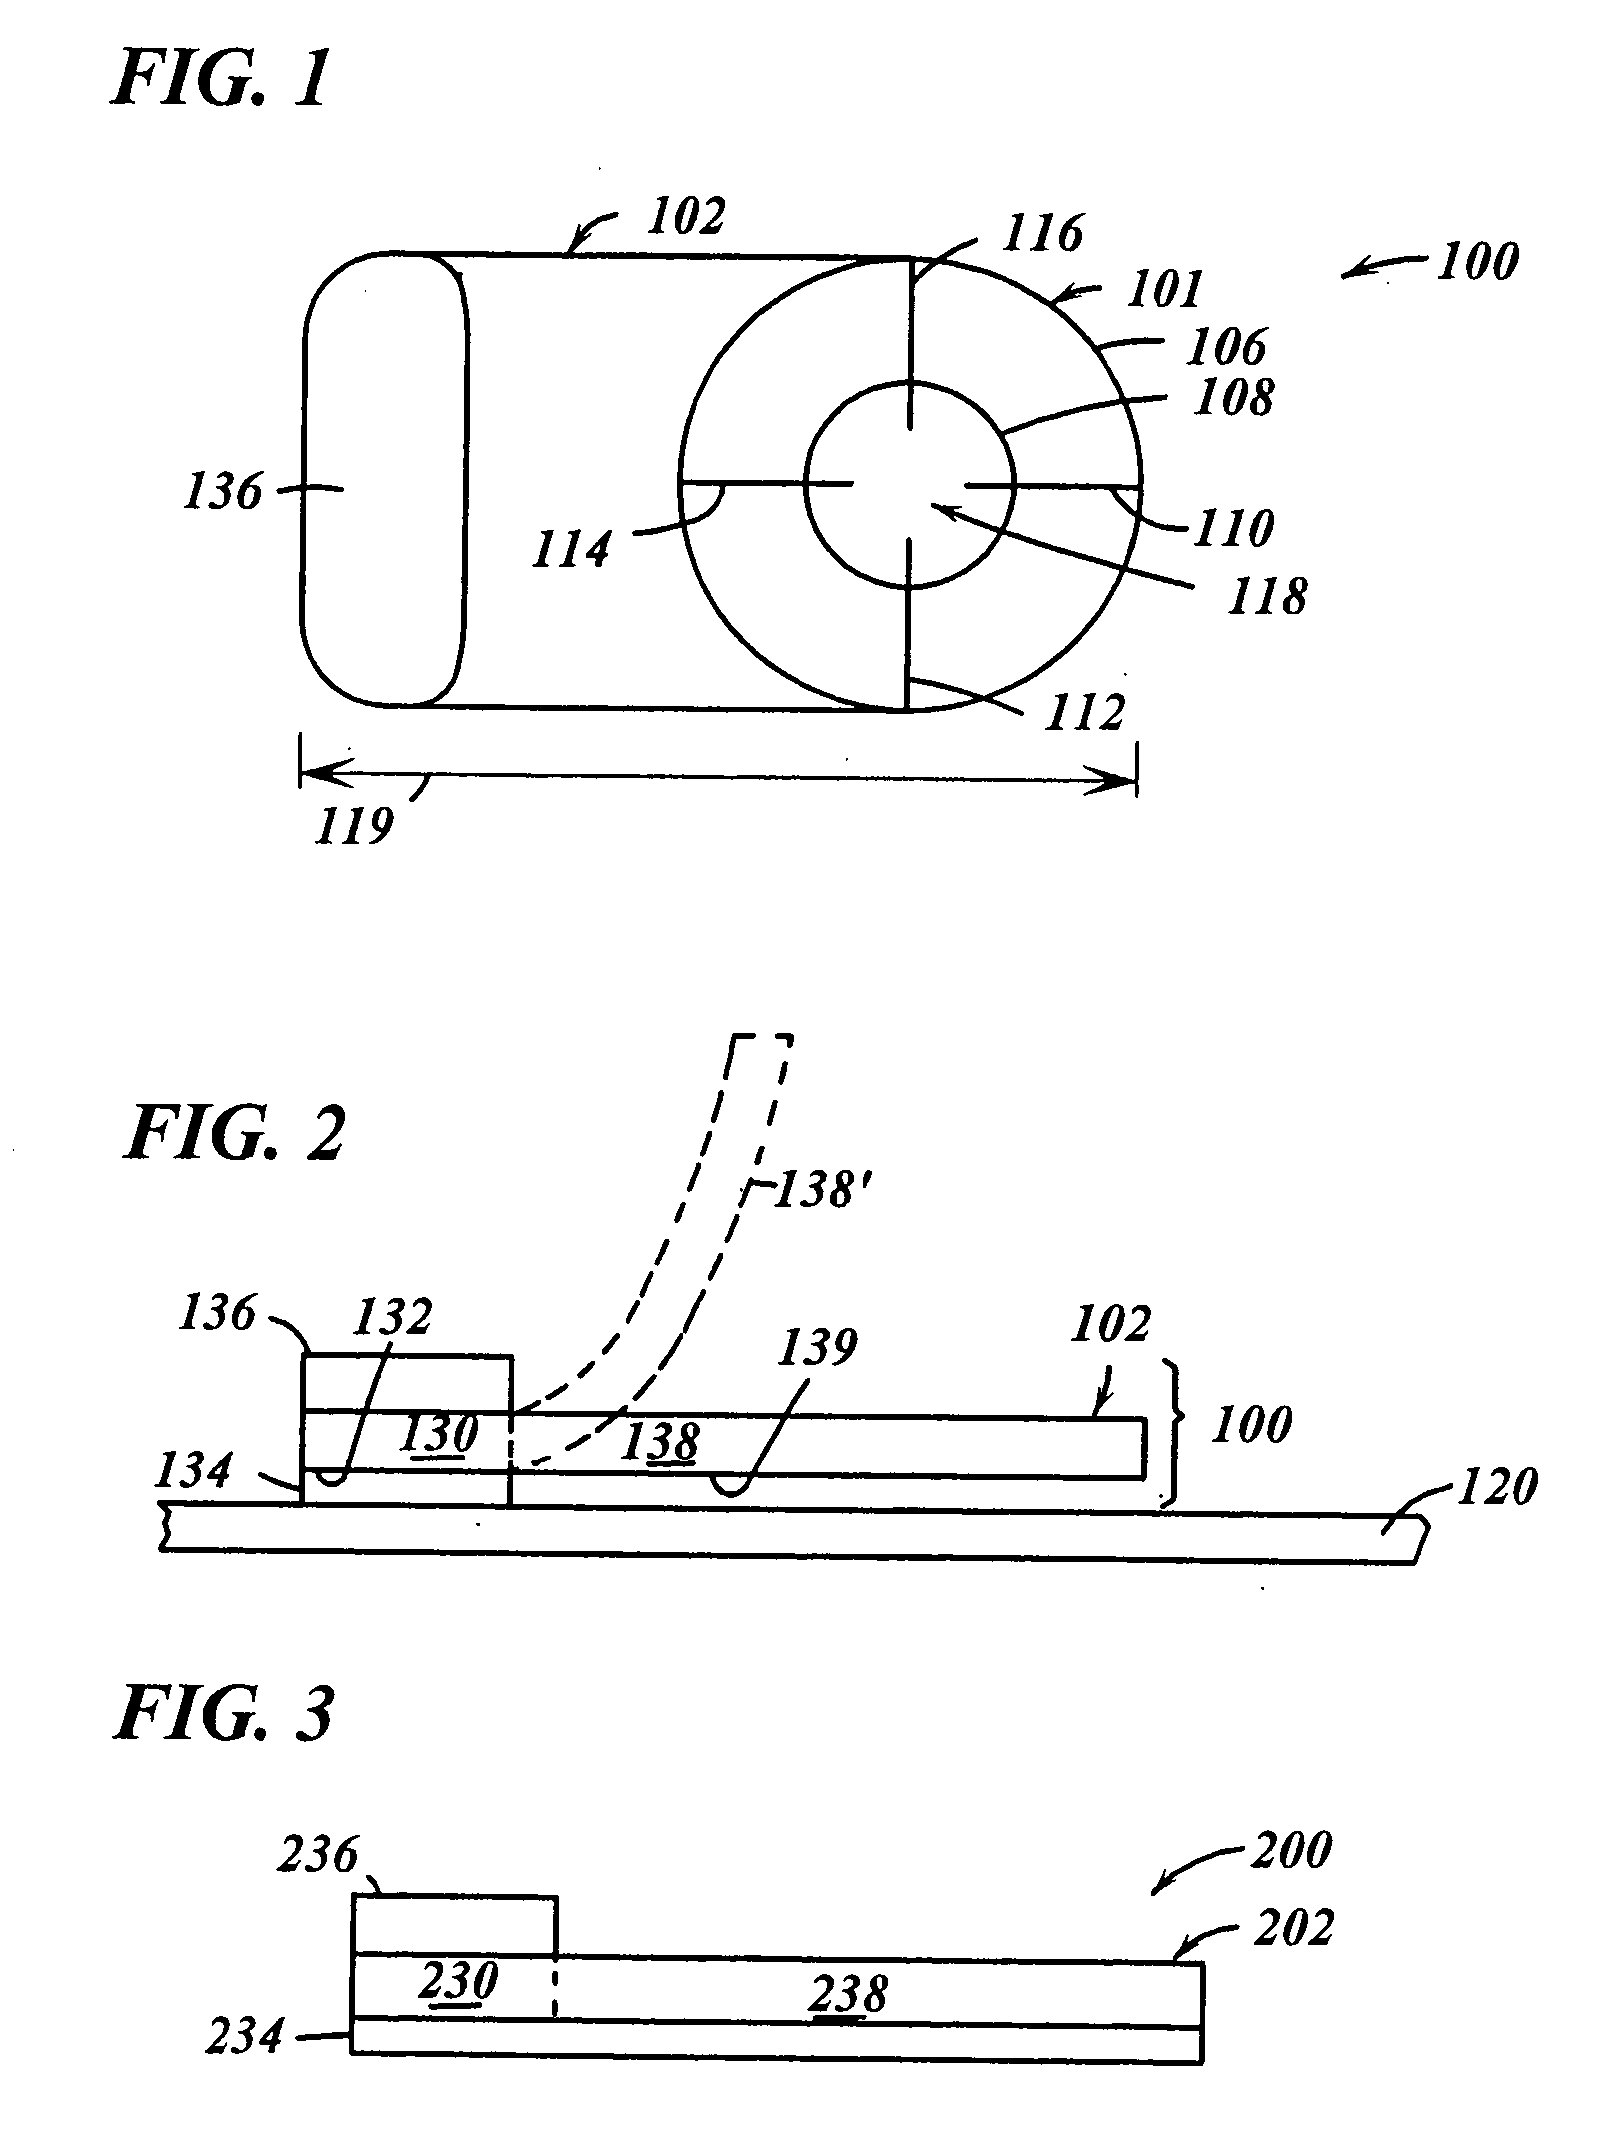 Markers, methods of marking, and marking systems for use in association with images